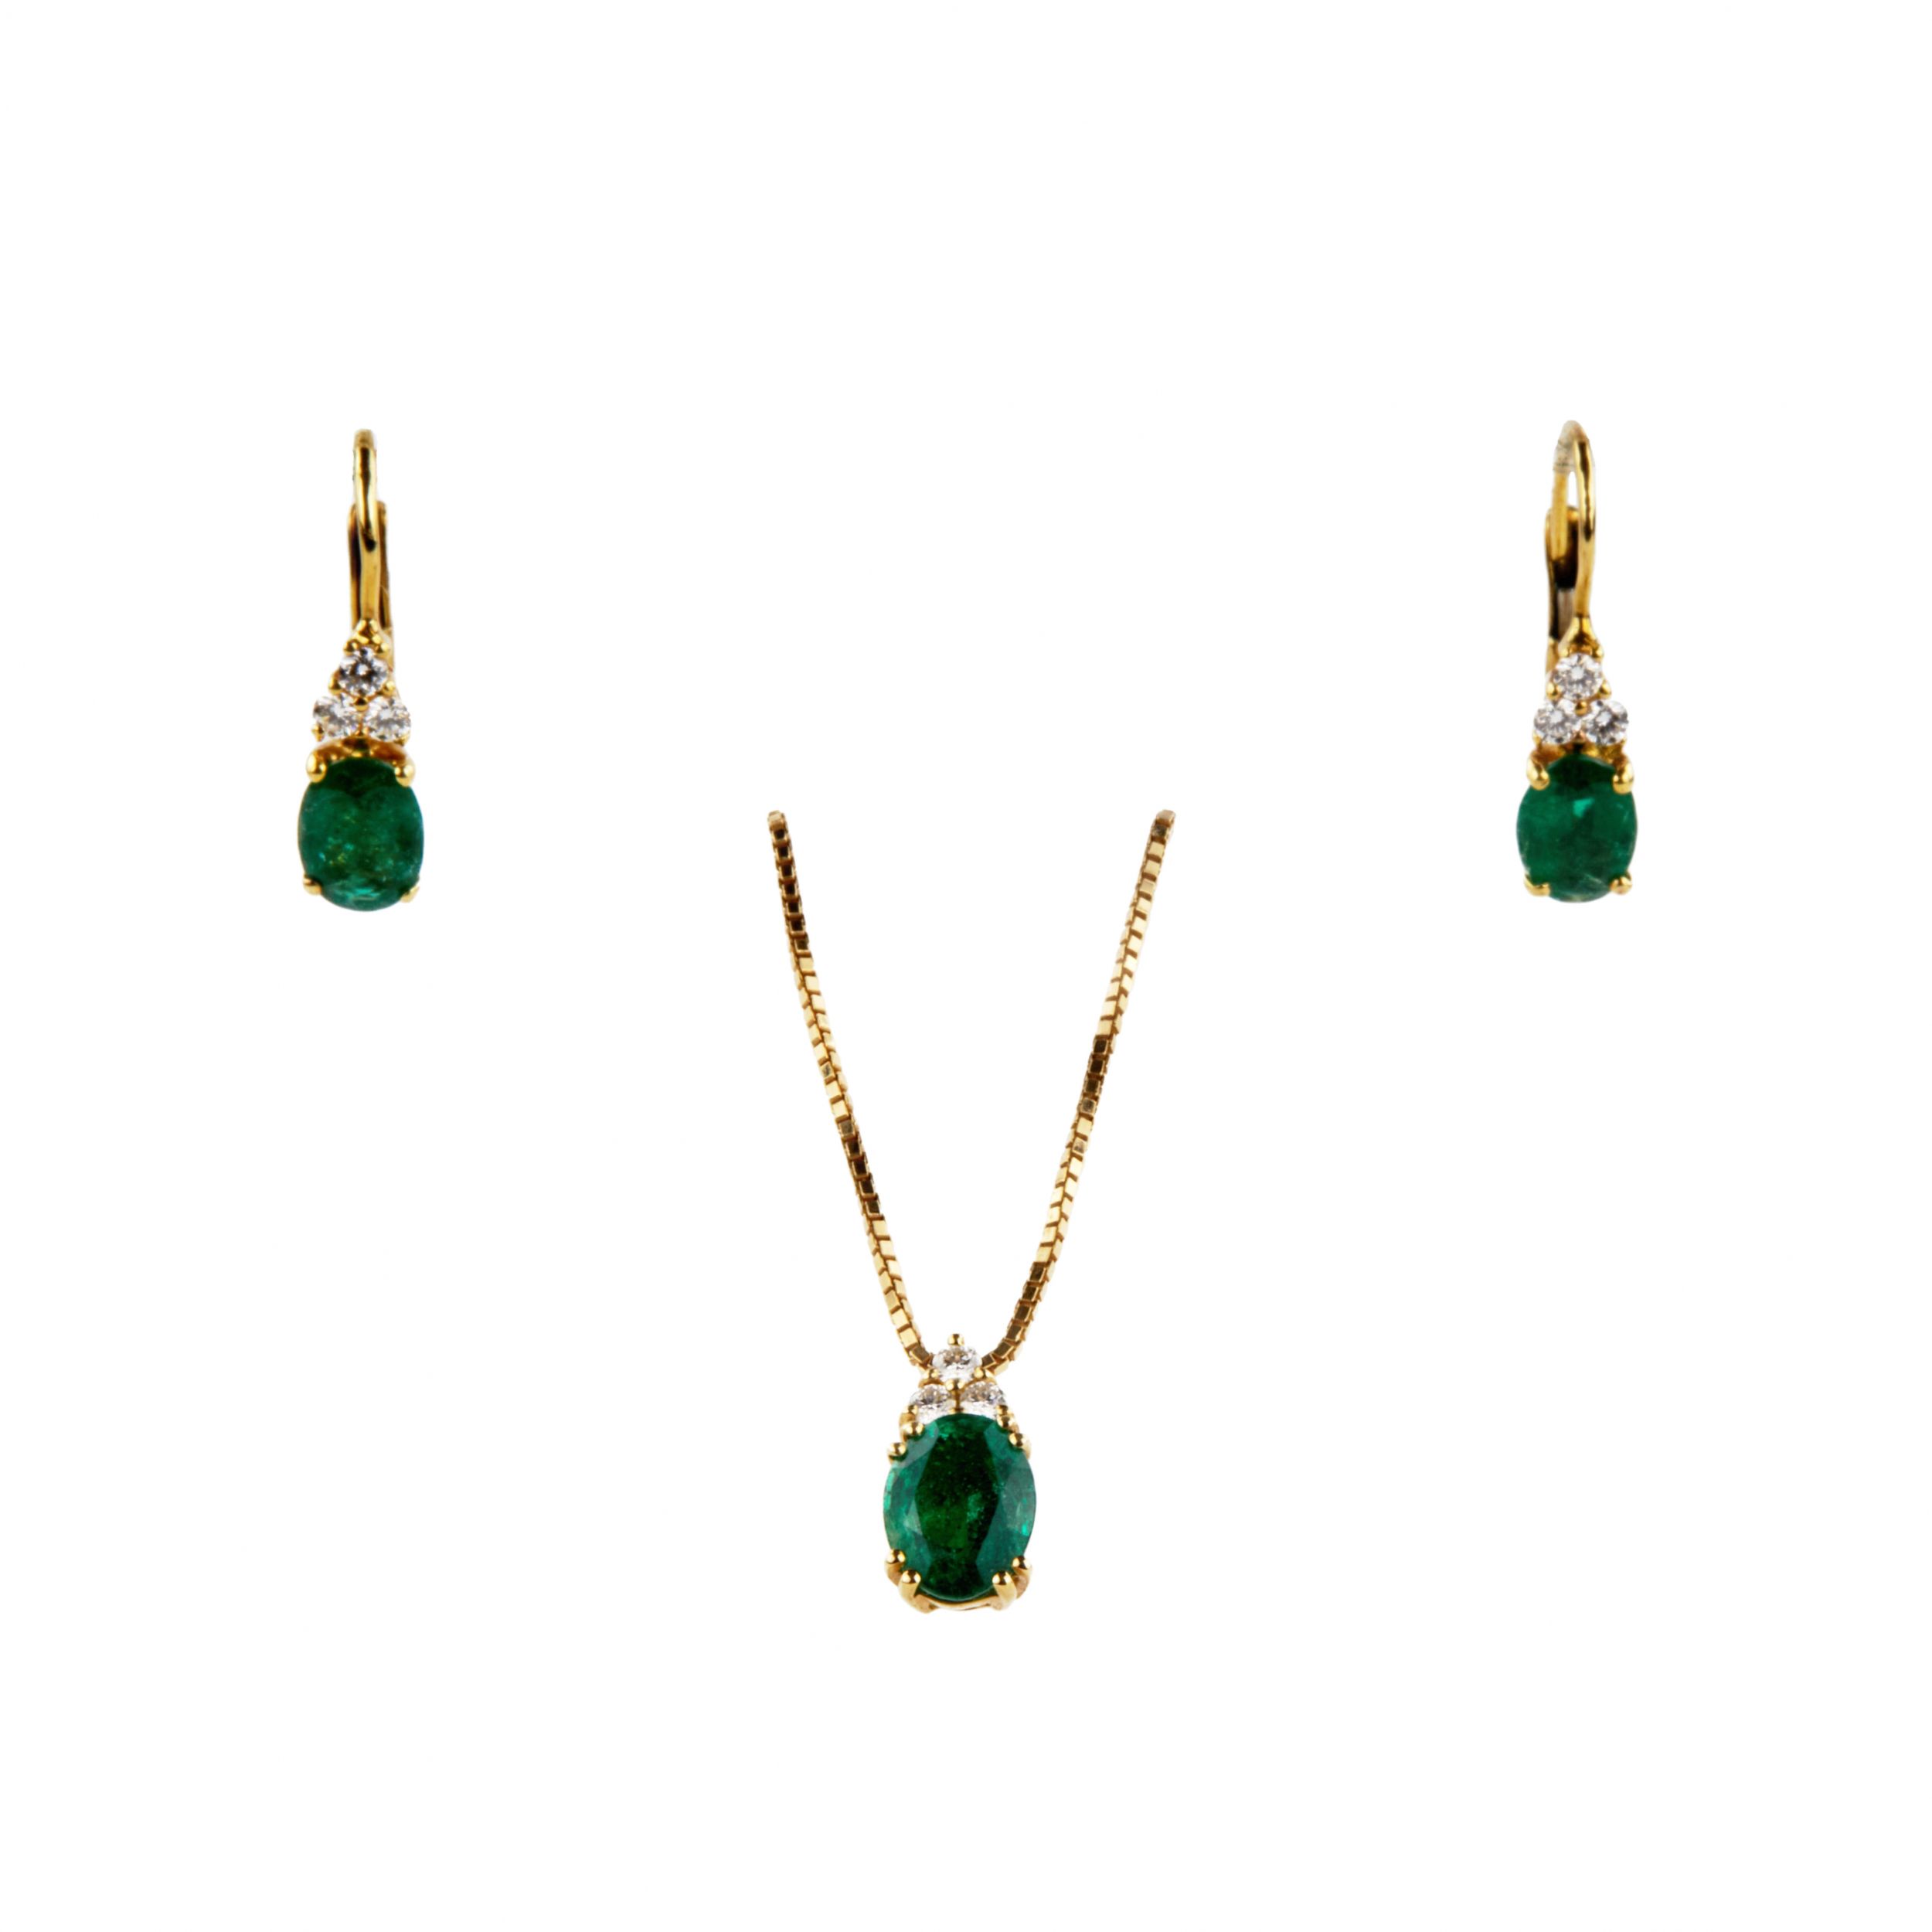 Giorgio-Visconti-Gold-pendant-and-earrings-with-emeralds-and-diamonds-